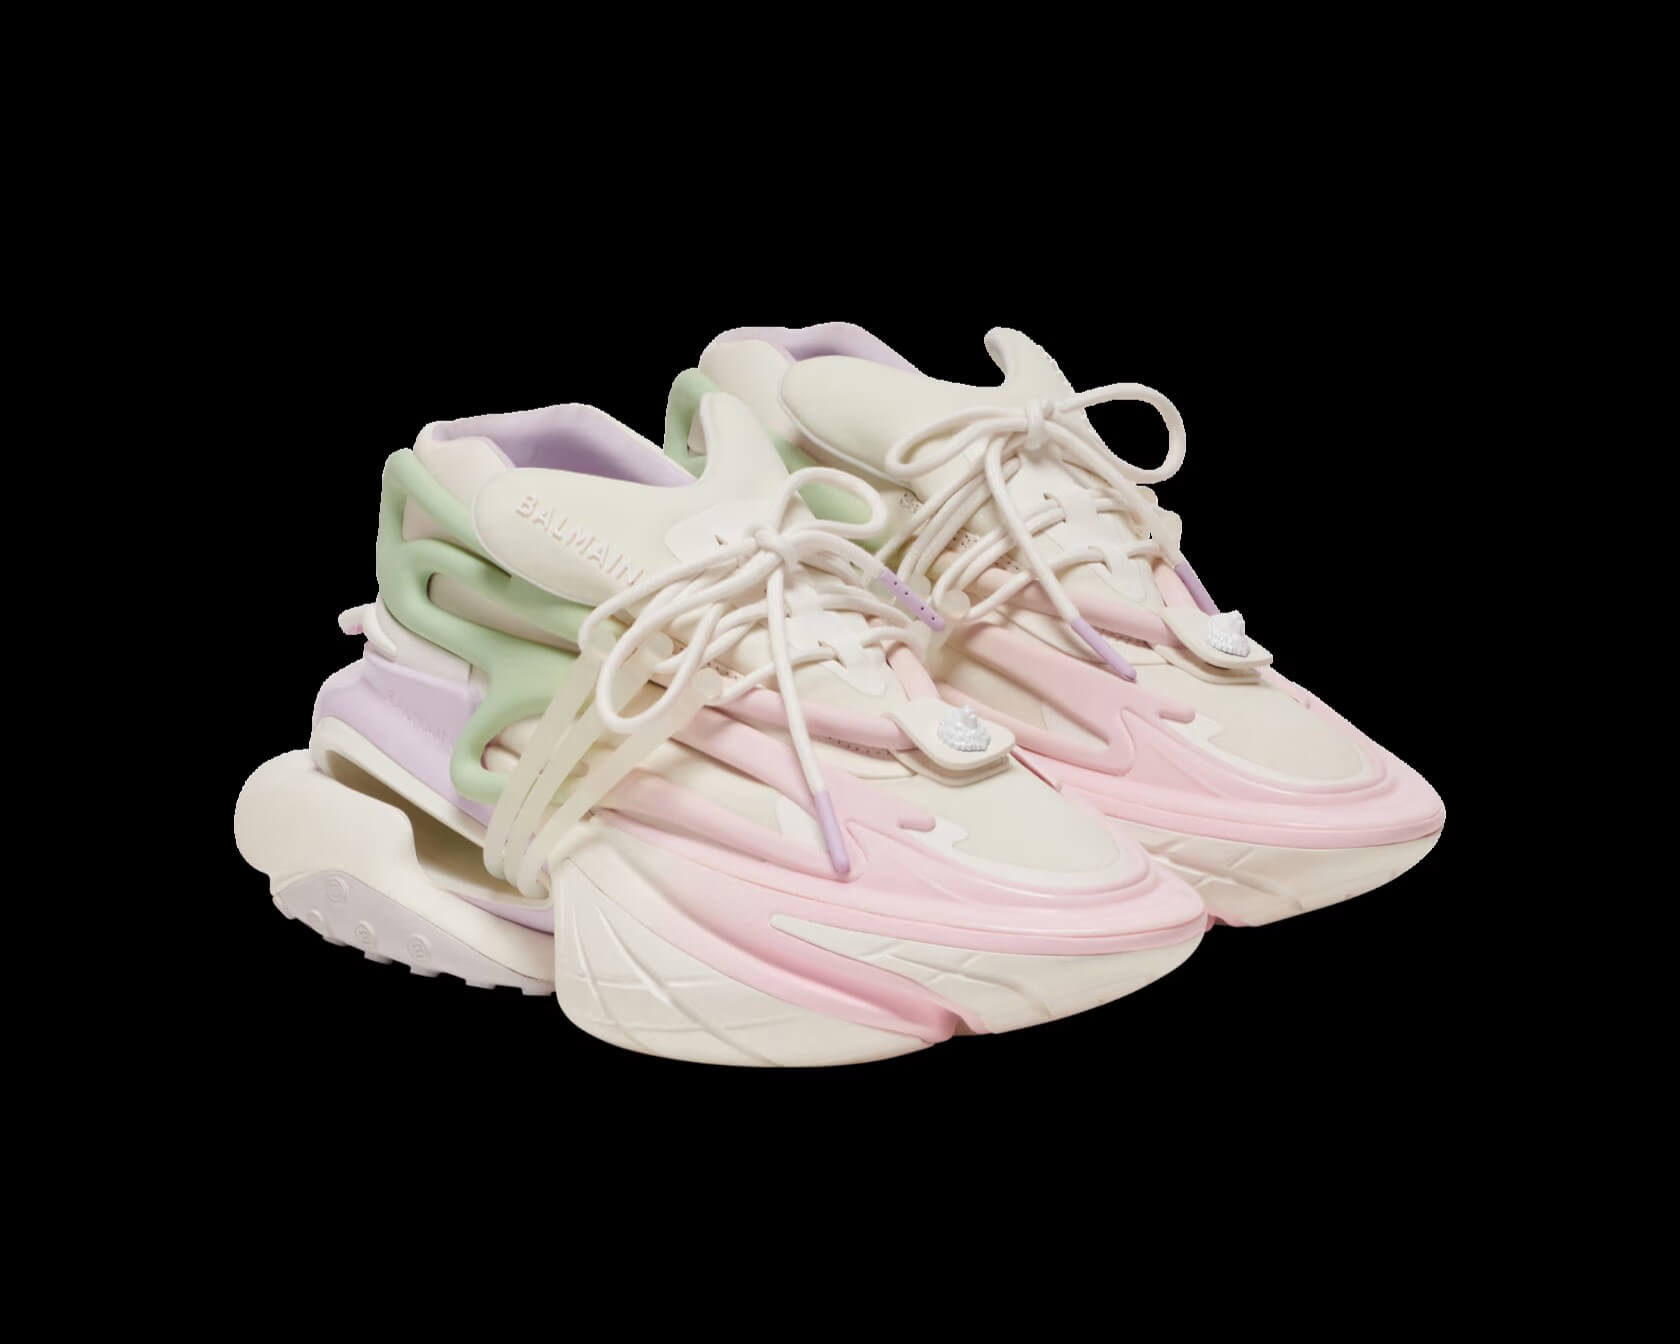 Unicorn trainers in neoprene and leather